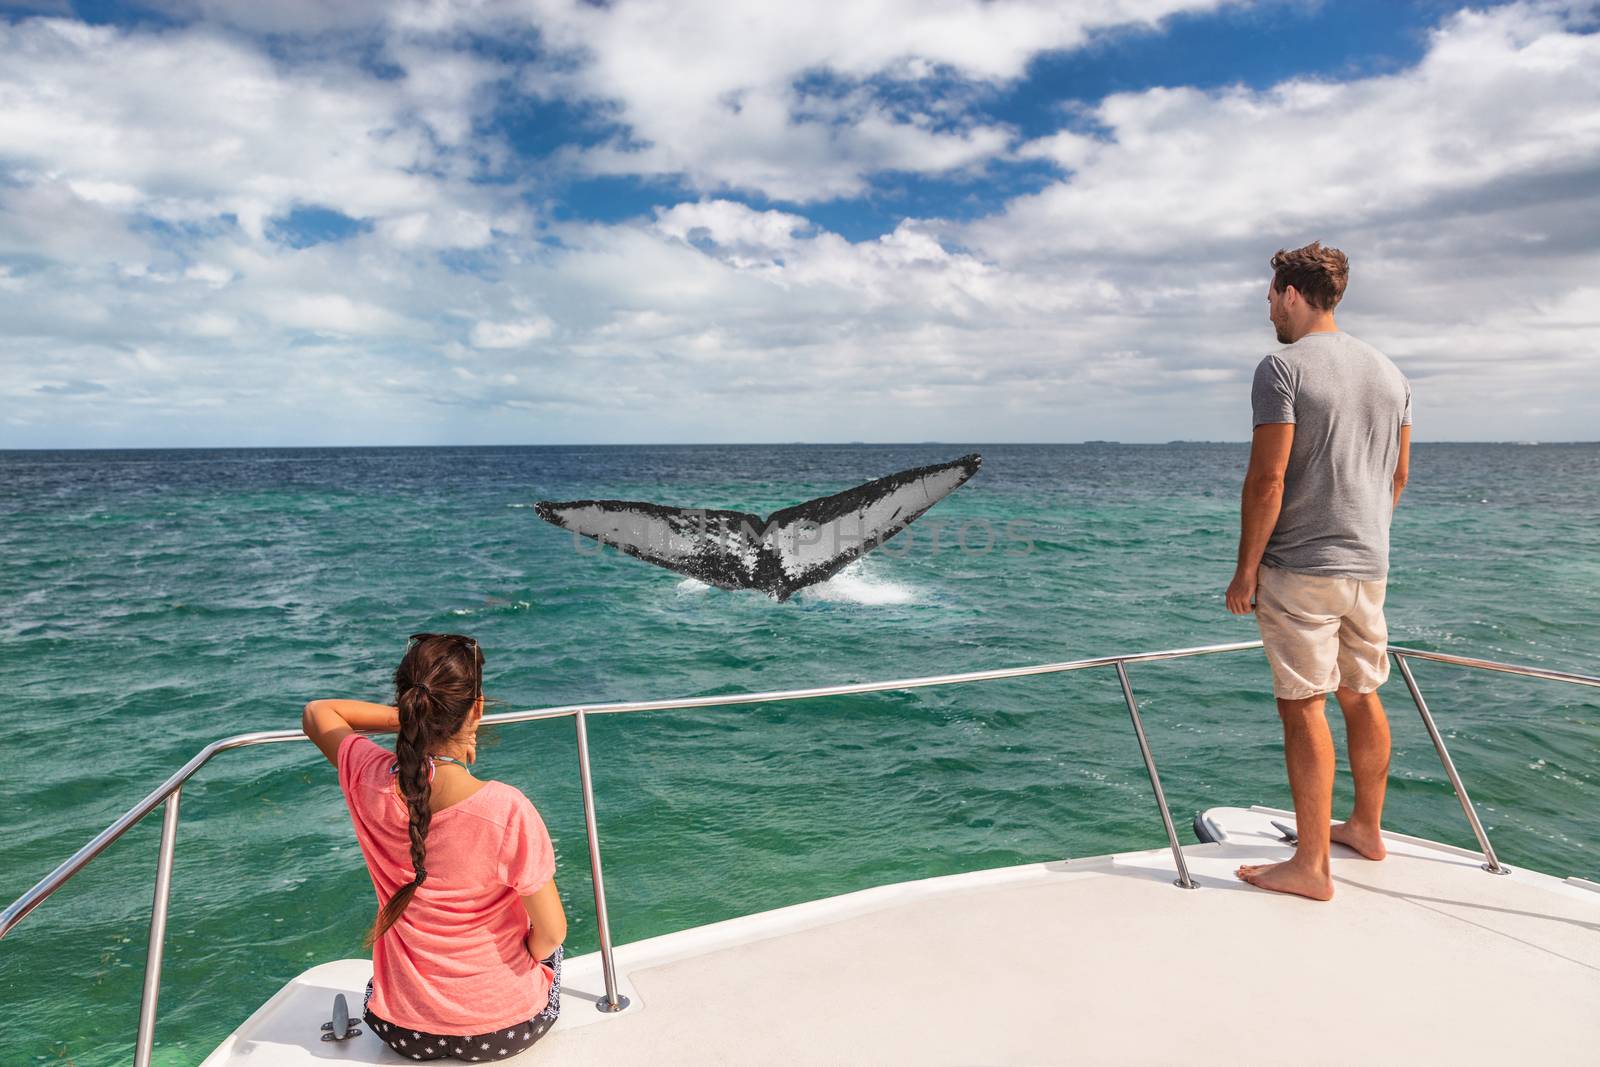 Whale watching boat tour tourists people on ship looking at humpback tail breaching ocean in tropical destination, summer travel vacation. Couple on deck of catamaran.